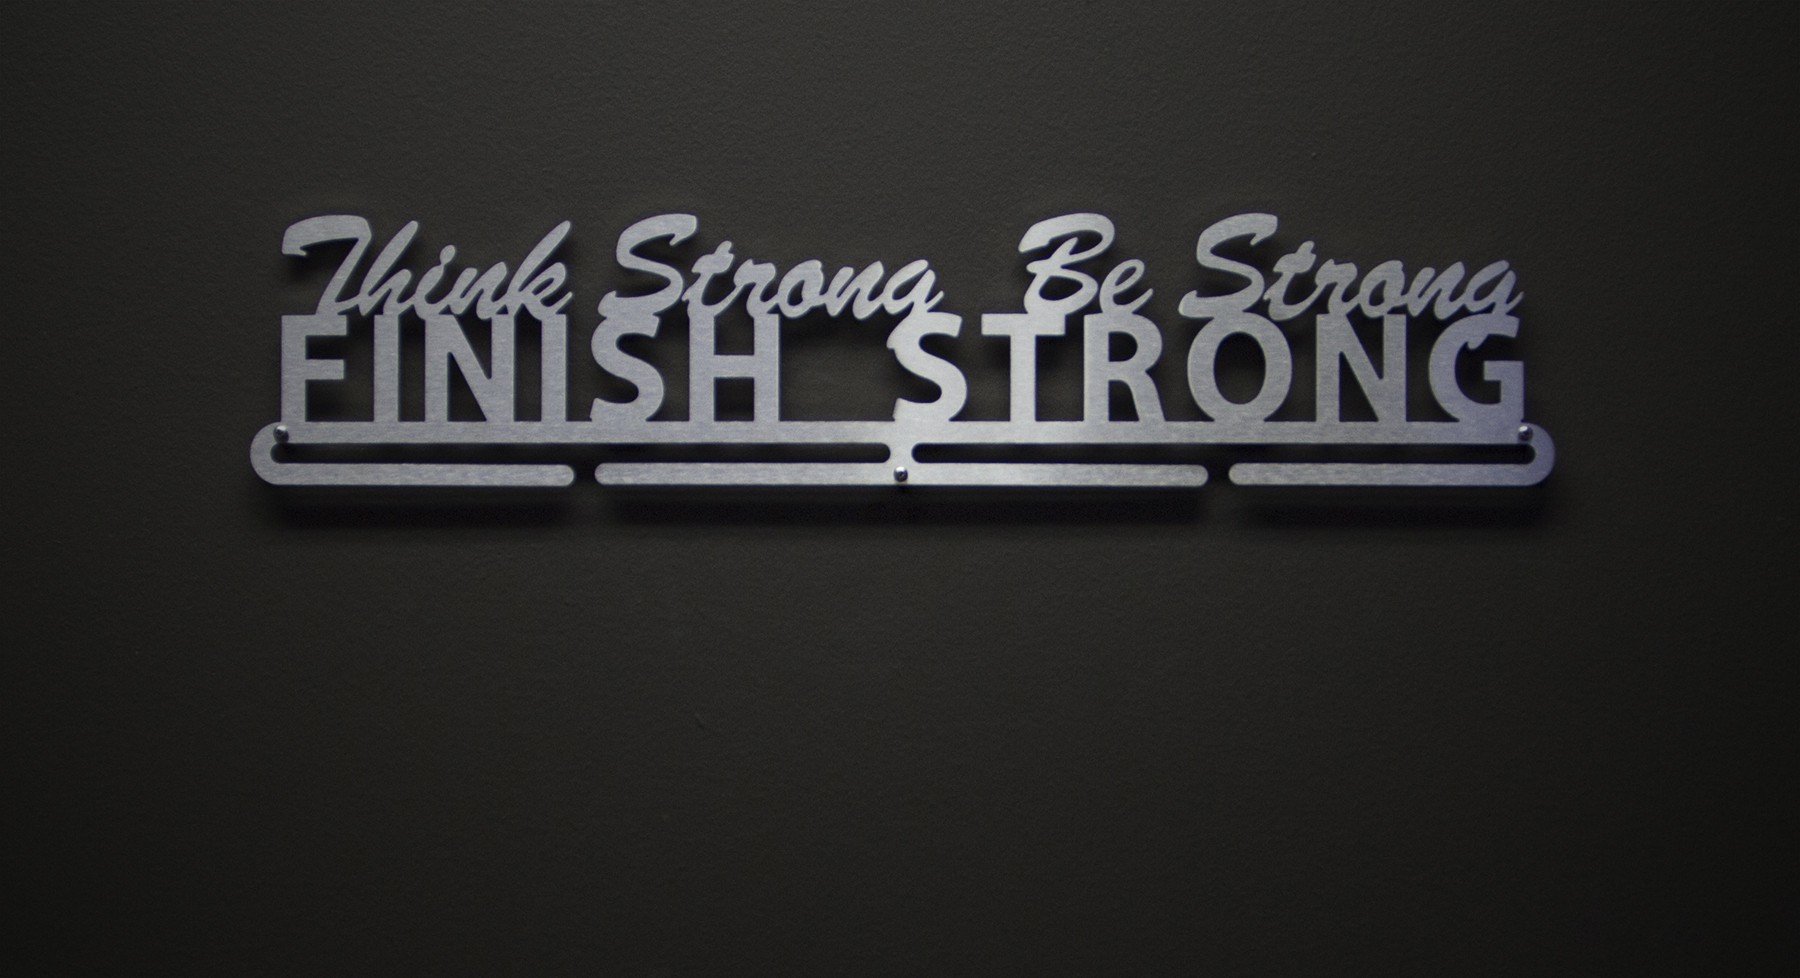 Think Strong Be Strong Finish Strong HJklmZ